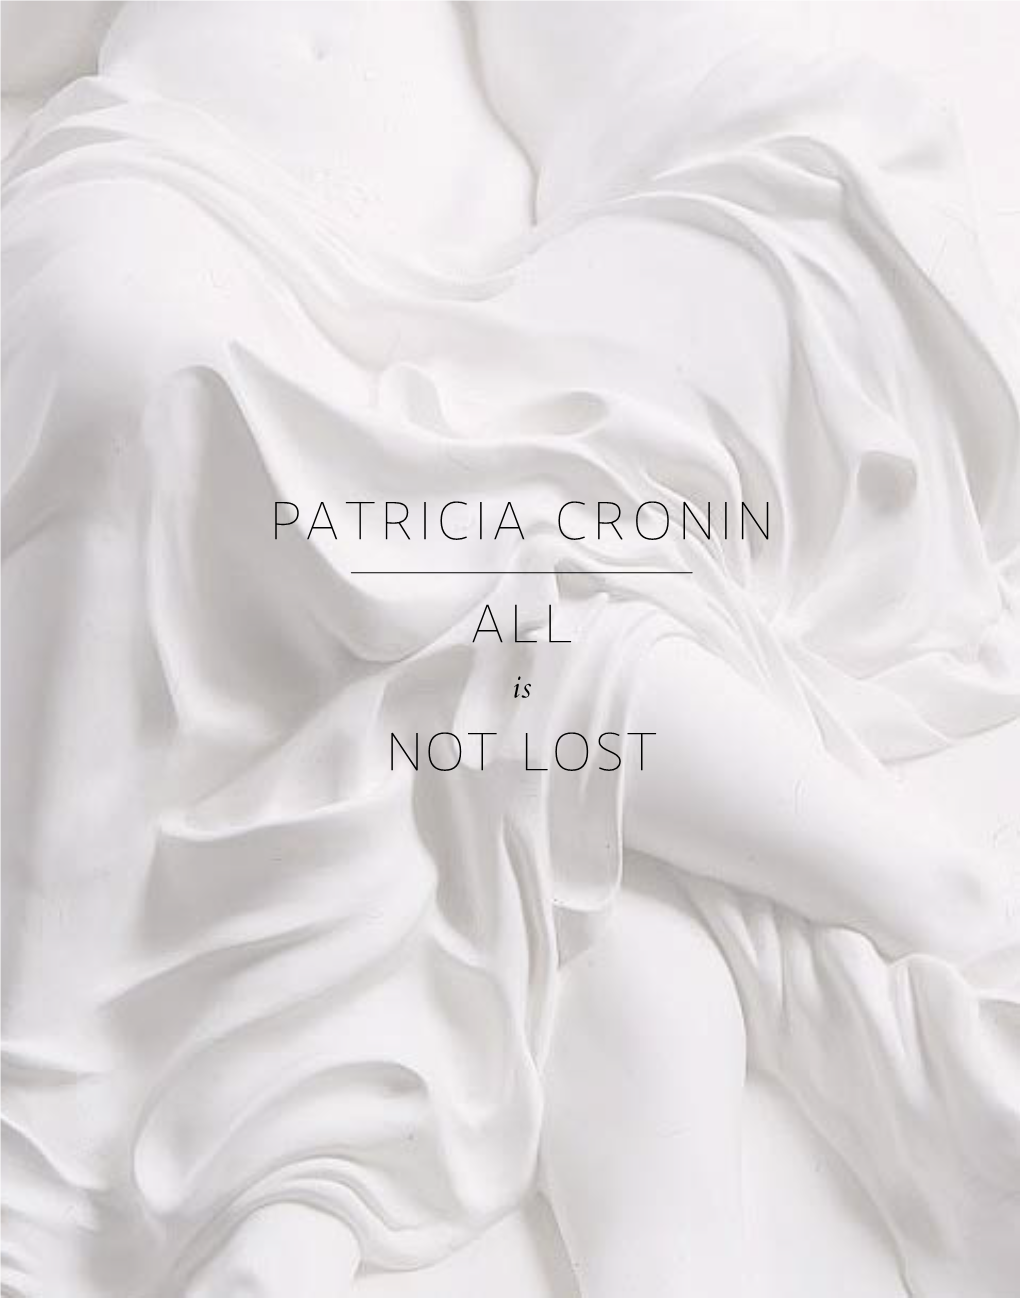 Patricia Cronin All Not Lost